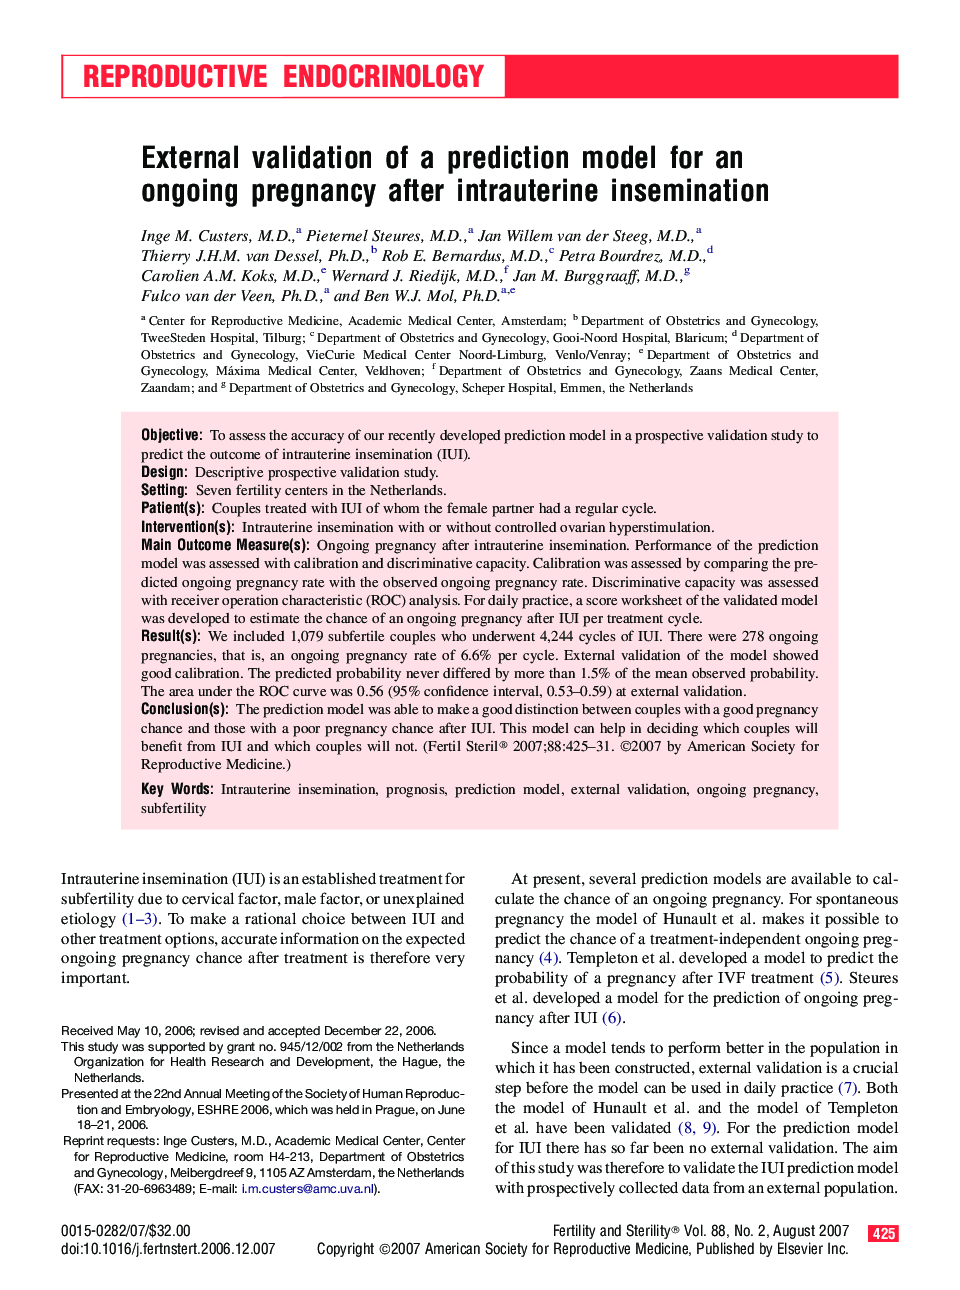 External validation of a prediction model for an ongoing pregnancy after intrauterine insemination 